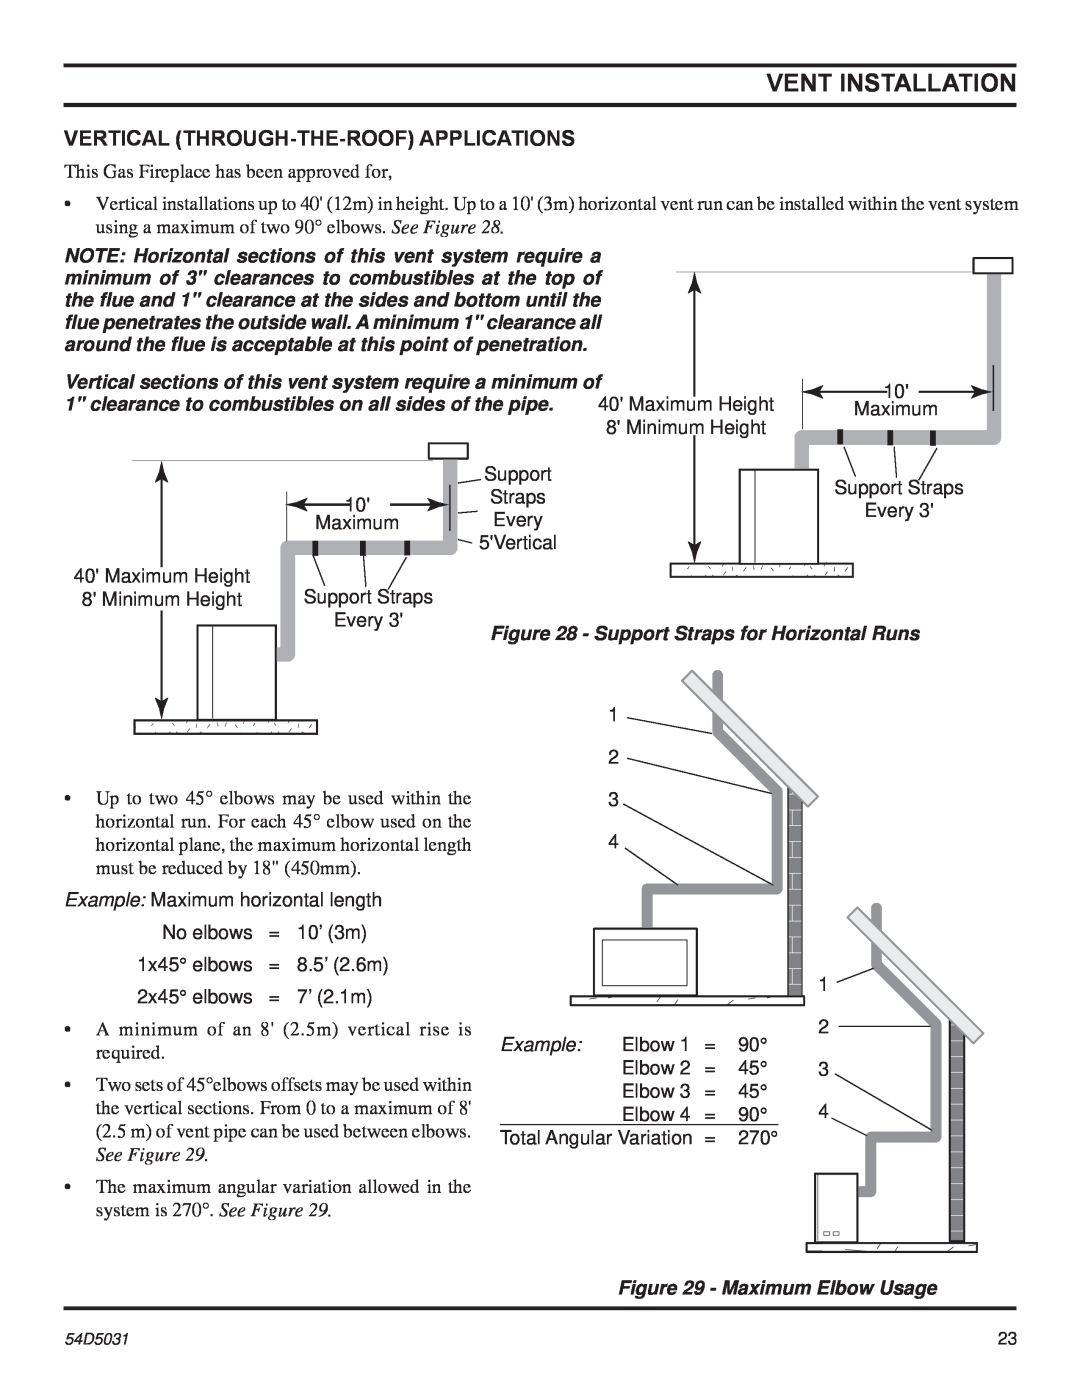 Monessen Hearth HBDV300 manual Vertical Through-The-Roofapplications, Vent Installation, Support Straps for Horizontal Runs 